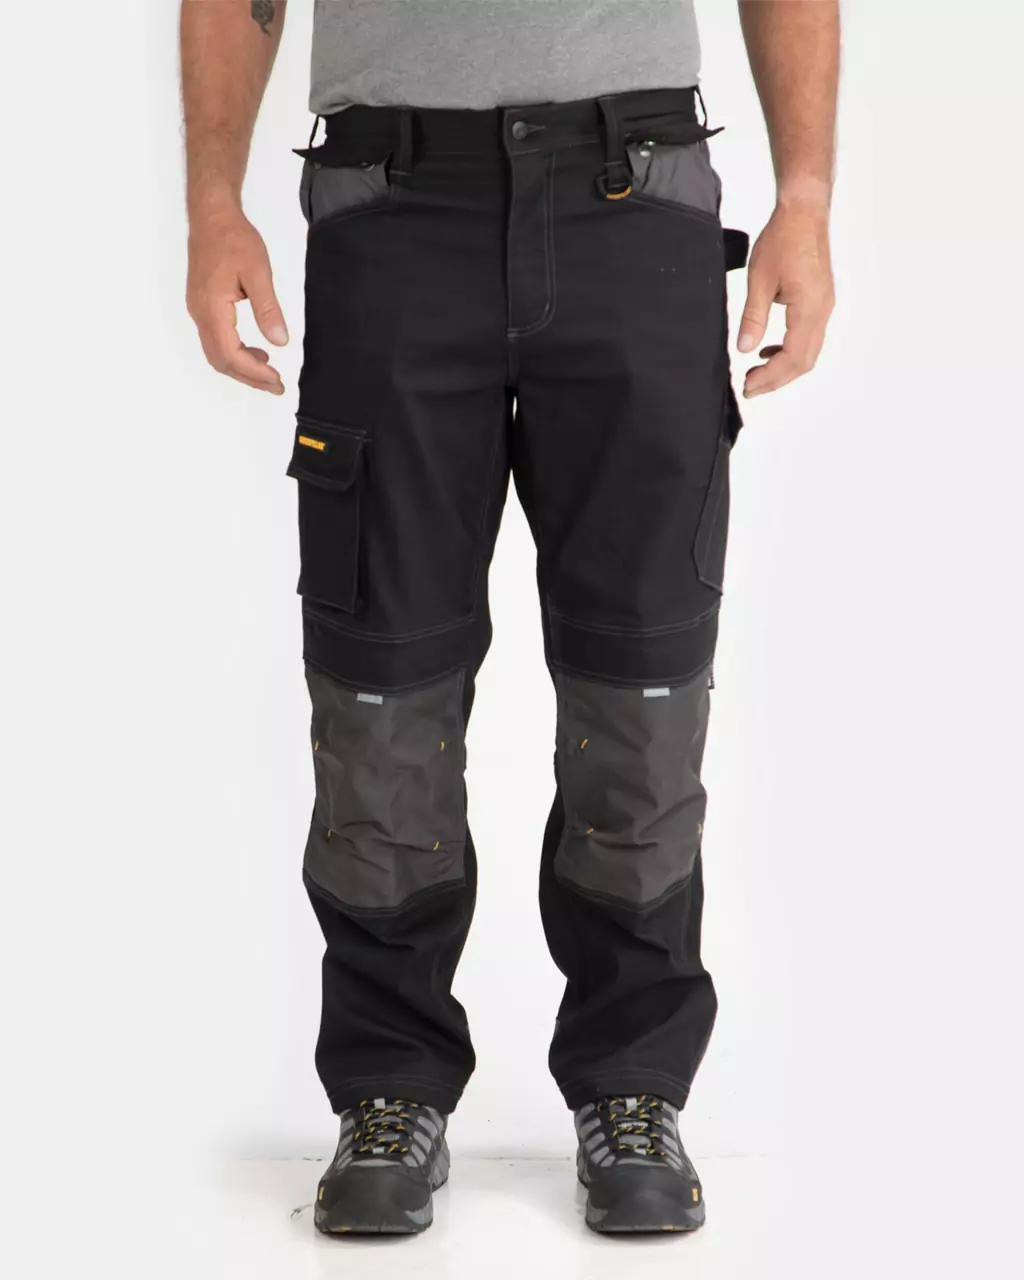 Best Work Trousers For Electricians  1st Electricians